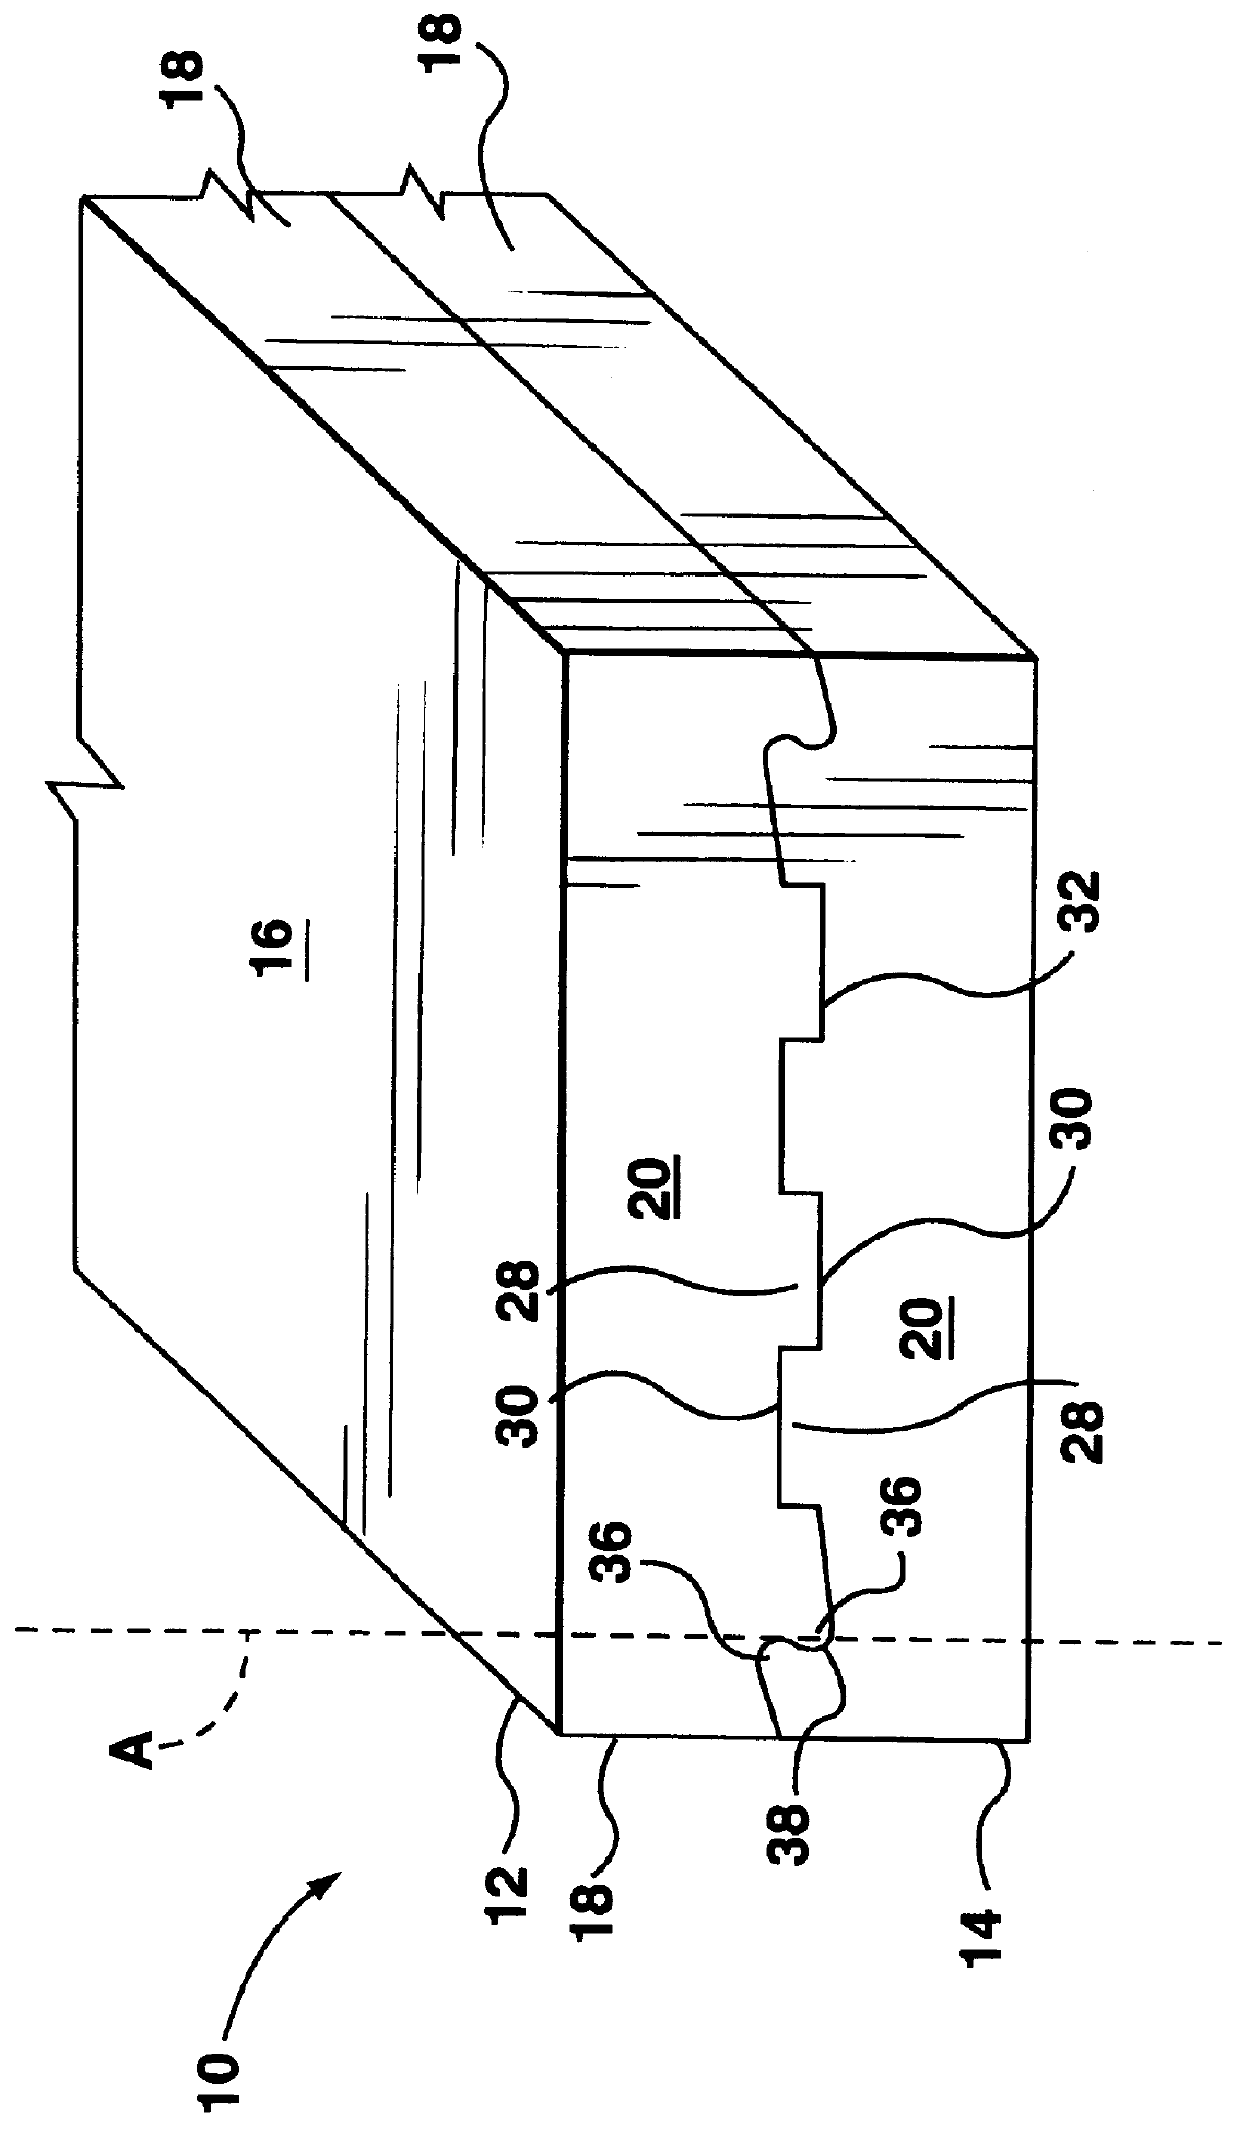 Wood article and method of manufacture